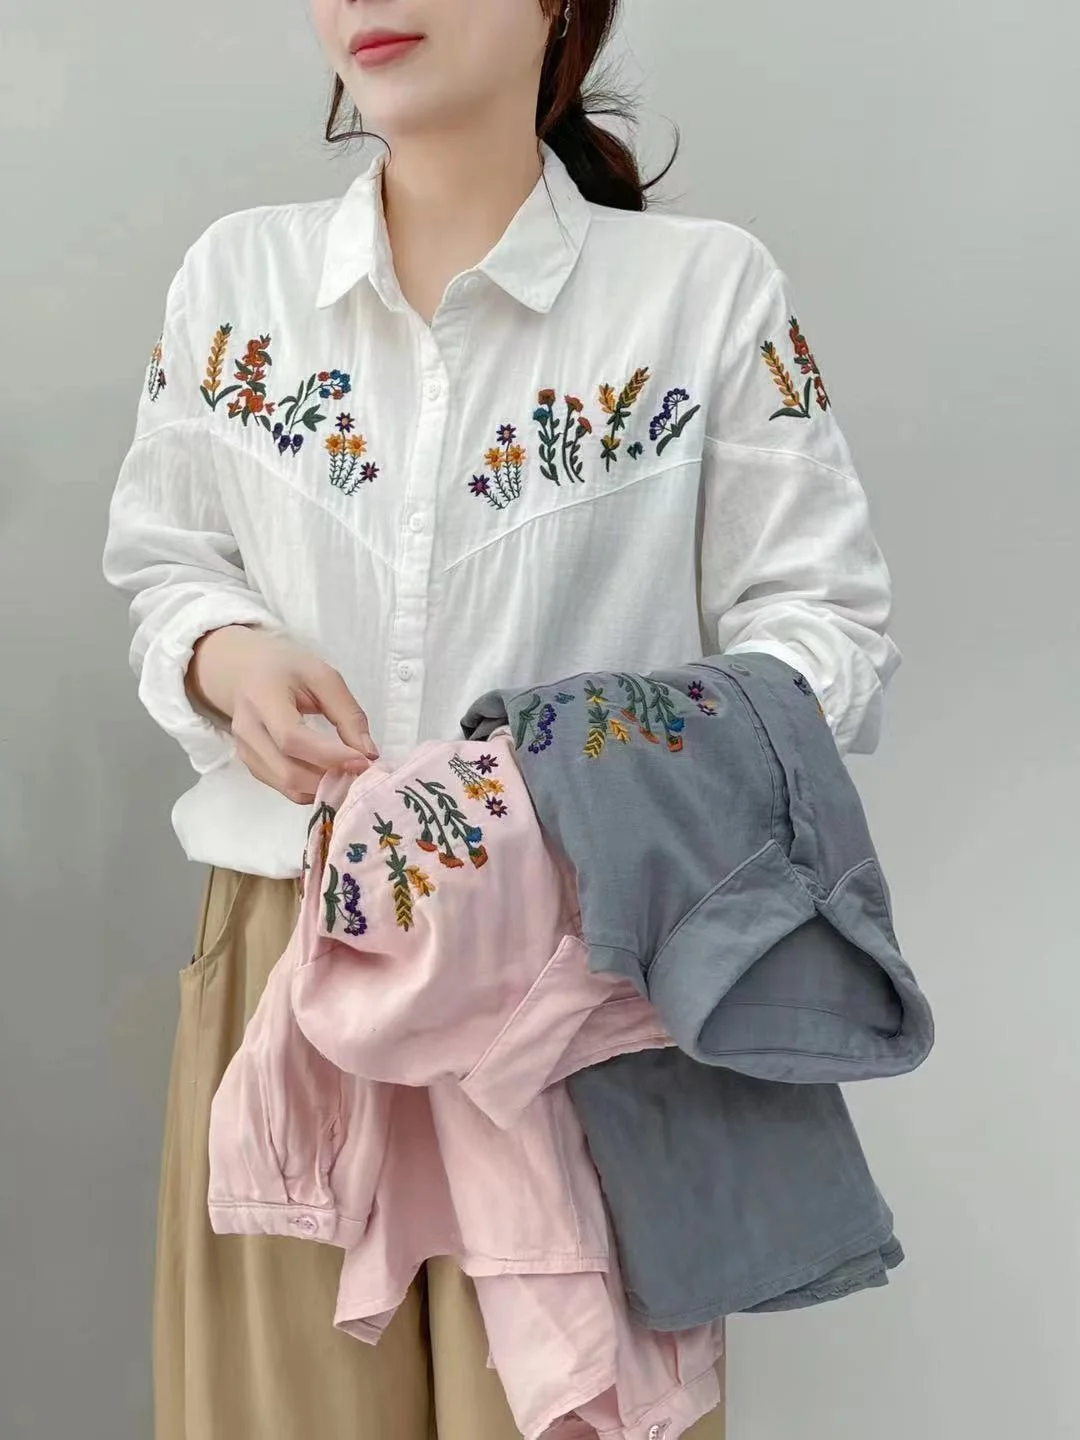 

100% Cotton yarn long sleeve blouses for women ethnic lapel embroider shirts large size tops korean style women clothing